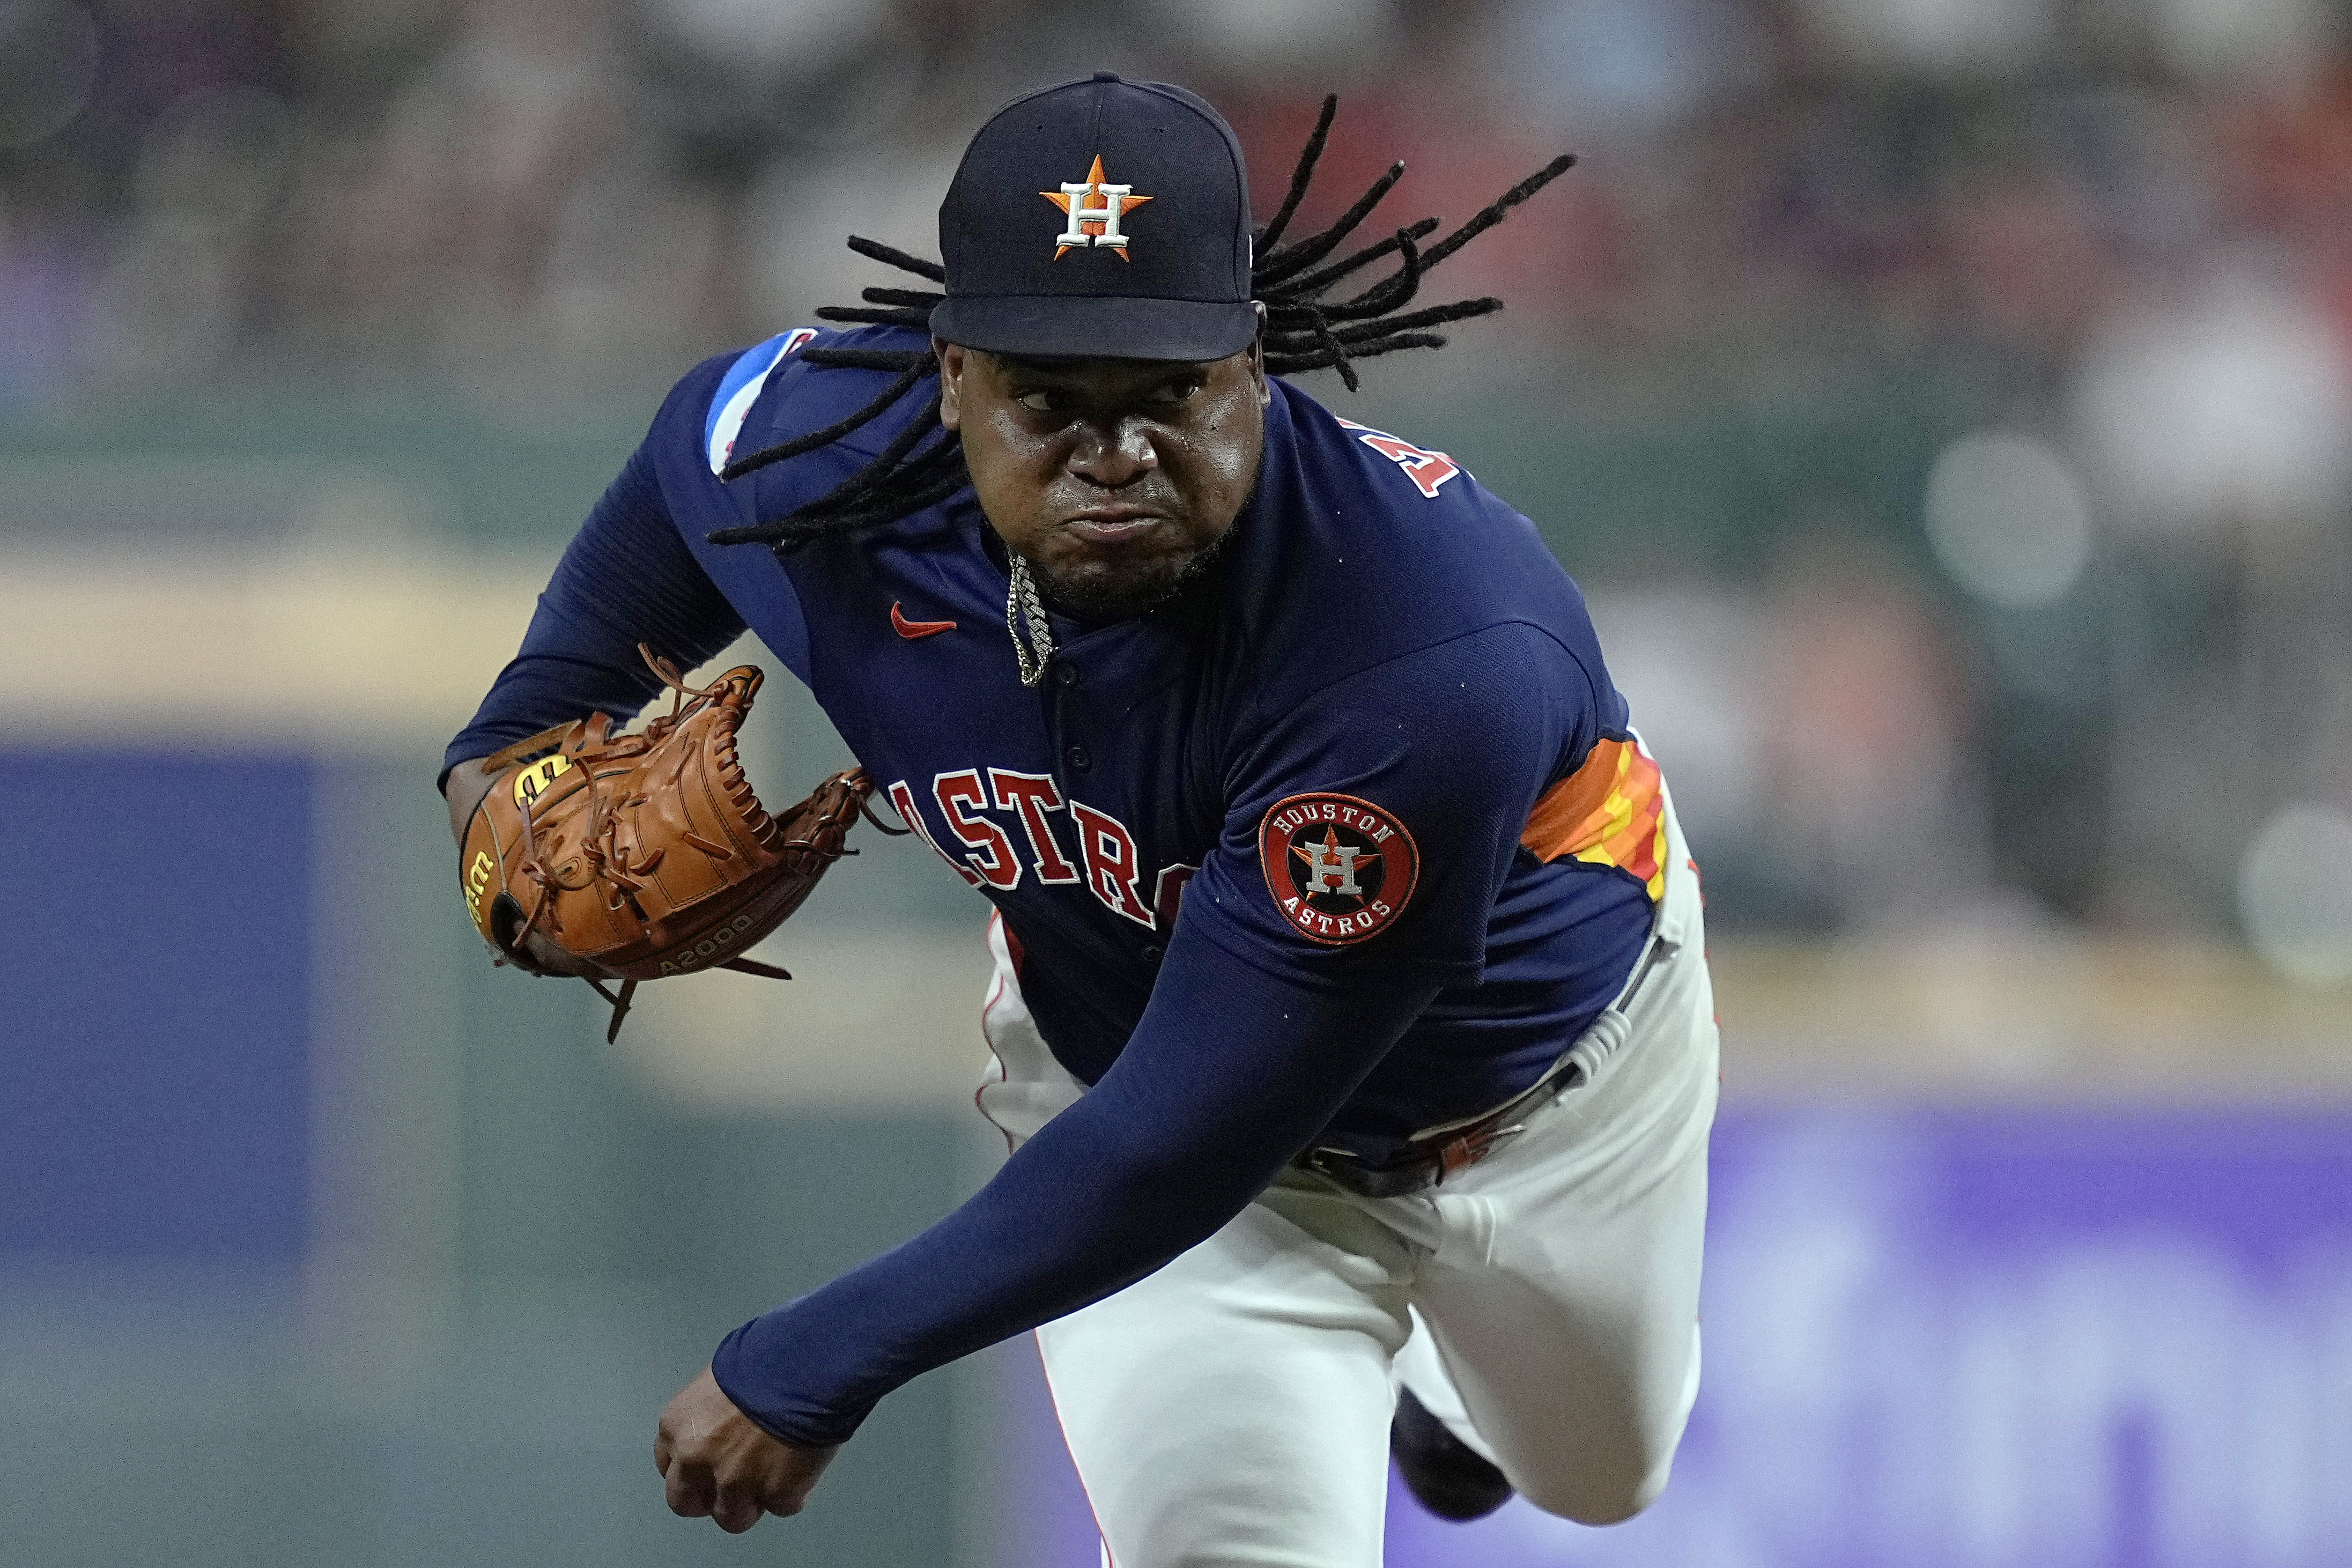 Framber Valdez pitches 16th no-hitter in Astros history